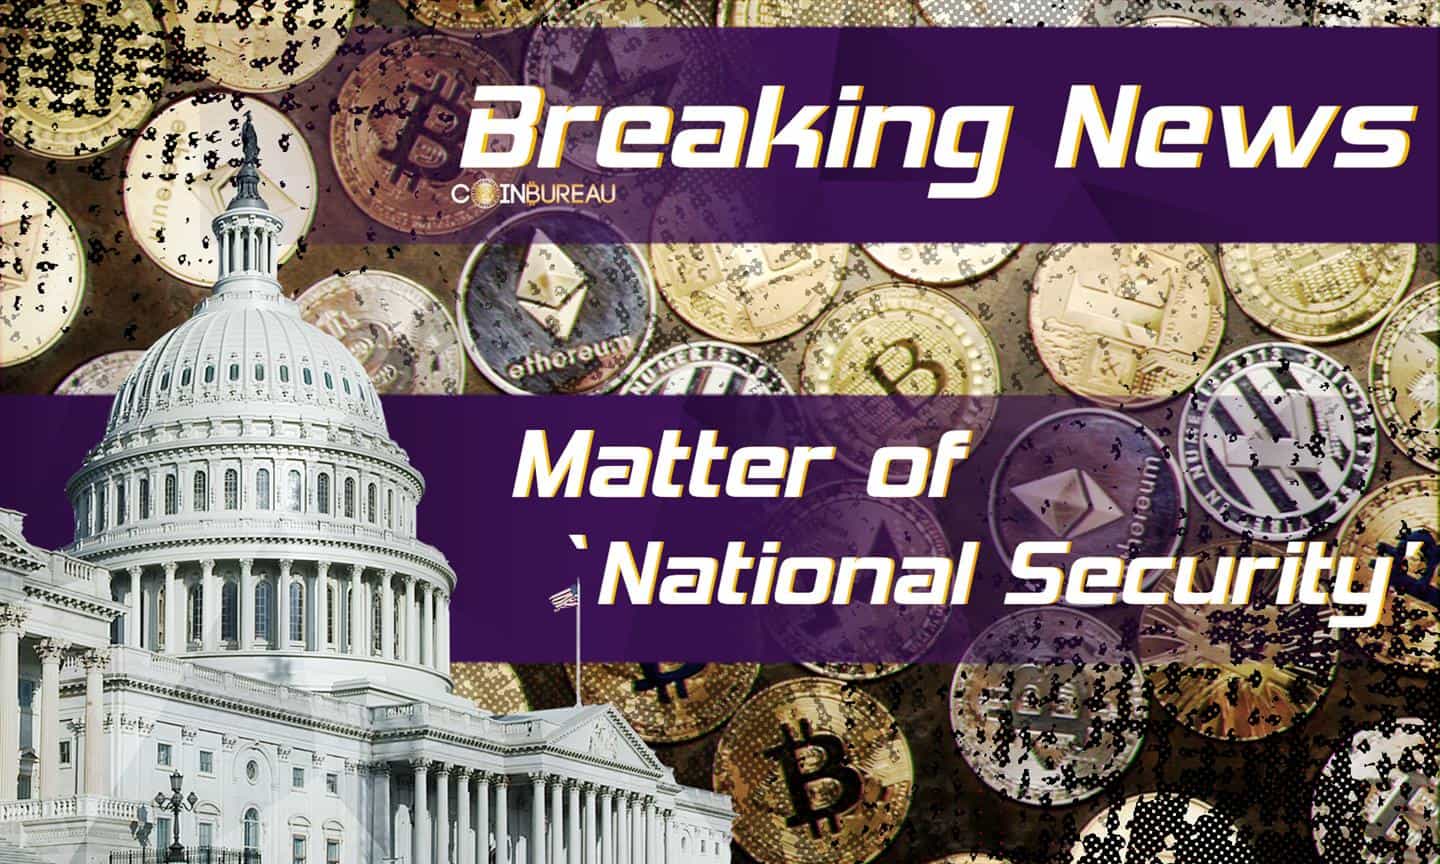 White House Reportedly Planning Crypto Regulation As Matter of ‘National Security'